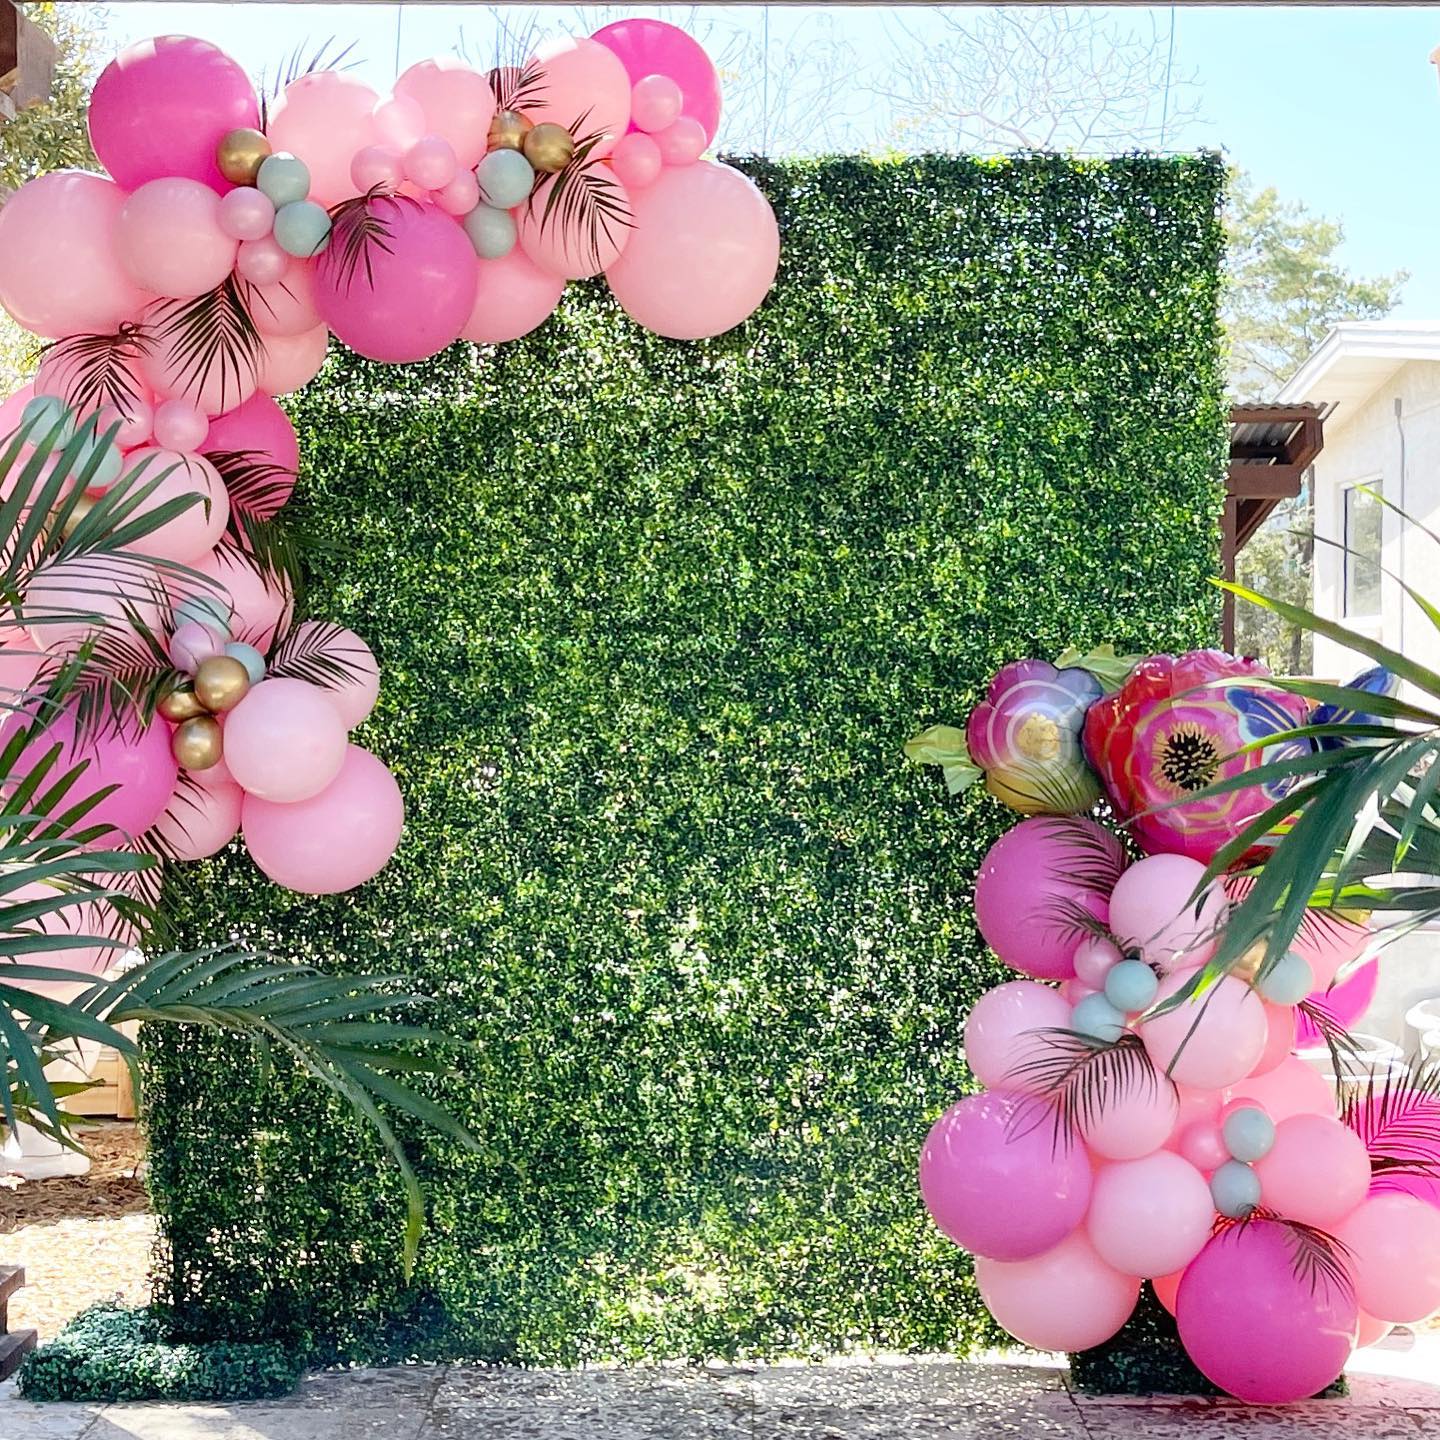 There are SO many ways to style balloons on our greenery wall! 🎀 💗 🌸 

#greenerywall #hedgewallbackdrop #backdrop #balloongarland #balloons #photobackdrop #eventplanning #balloonstylist #event